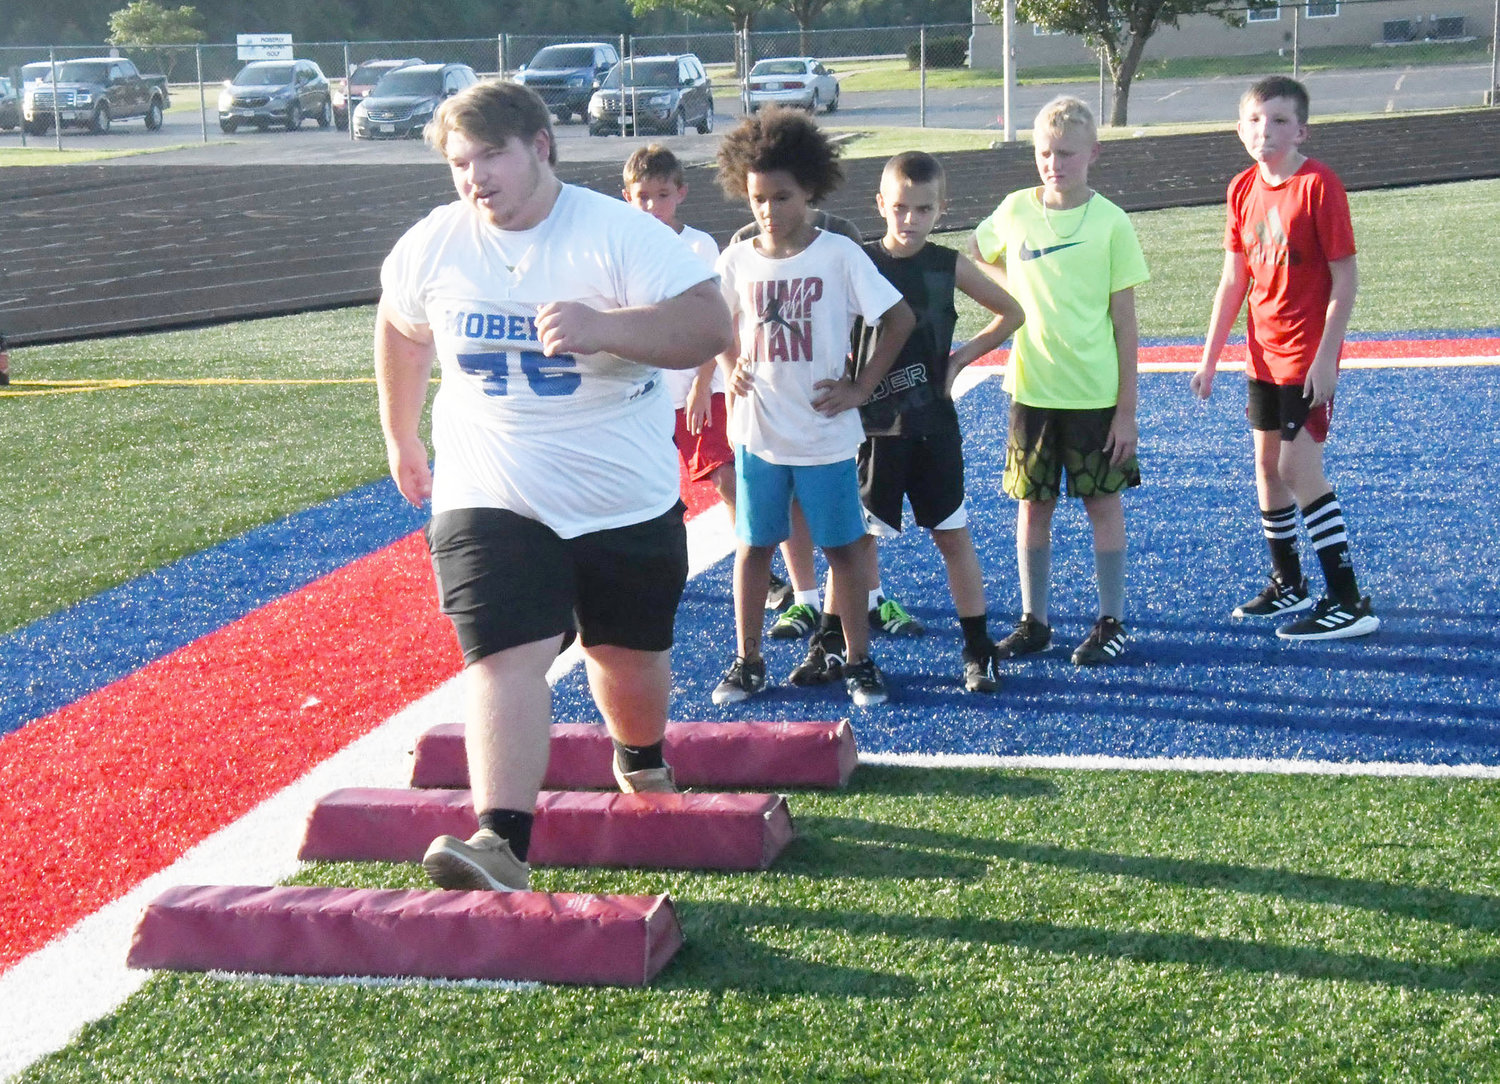 Moberly High School defensive lineman Christian Wolfe, a junior, served as one of the player instructors.